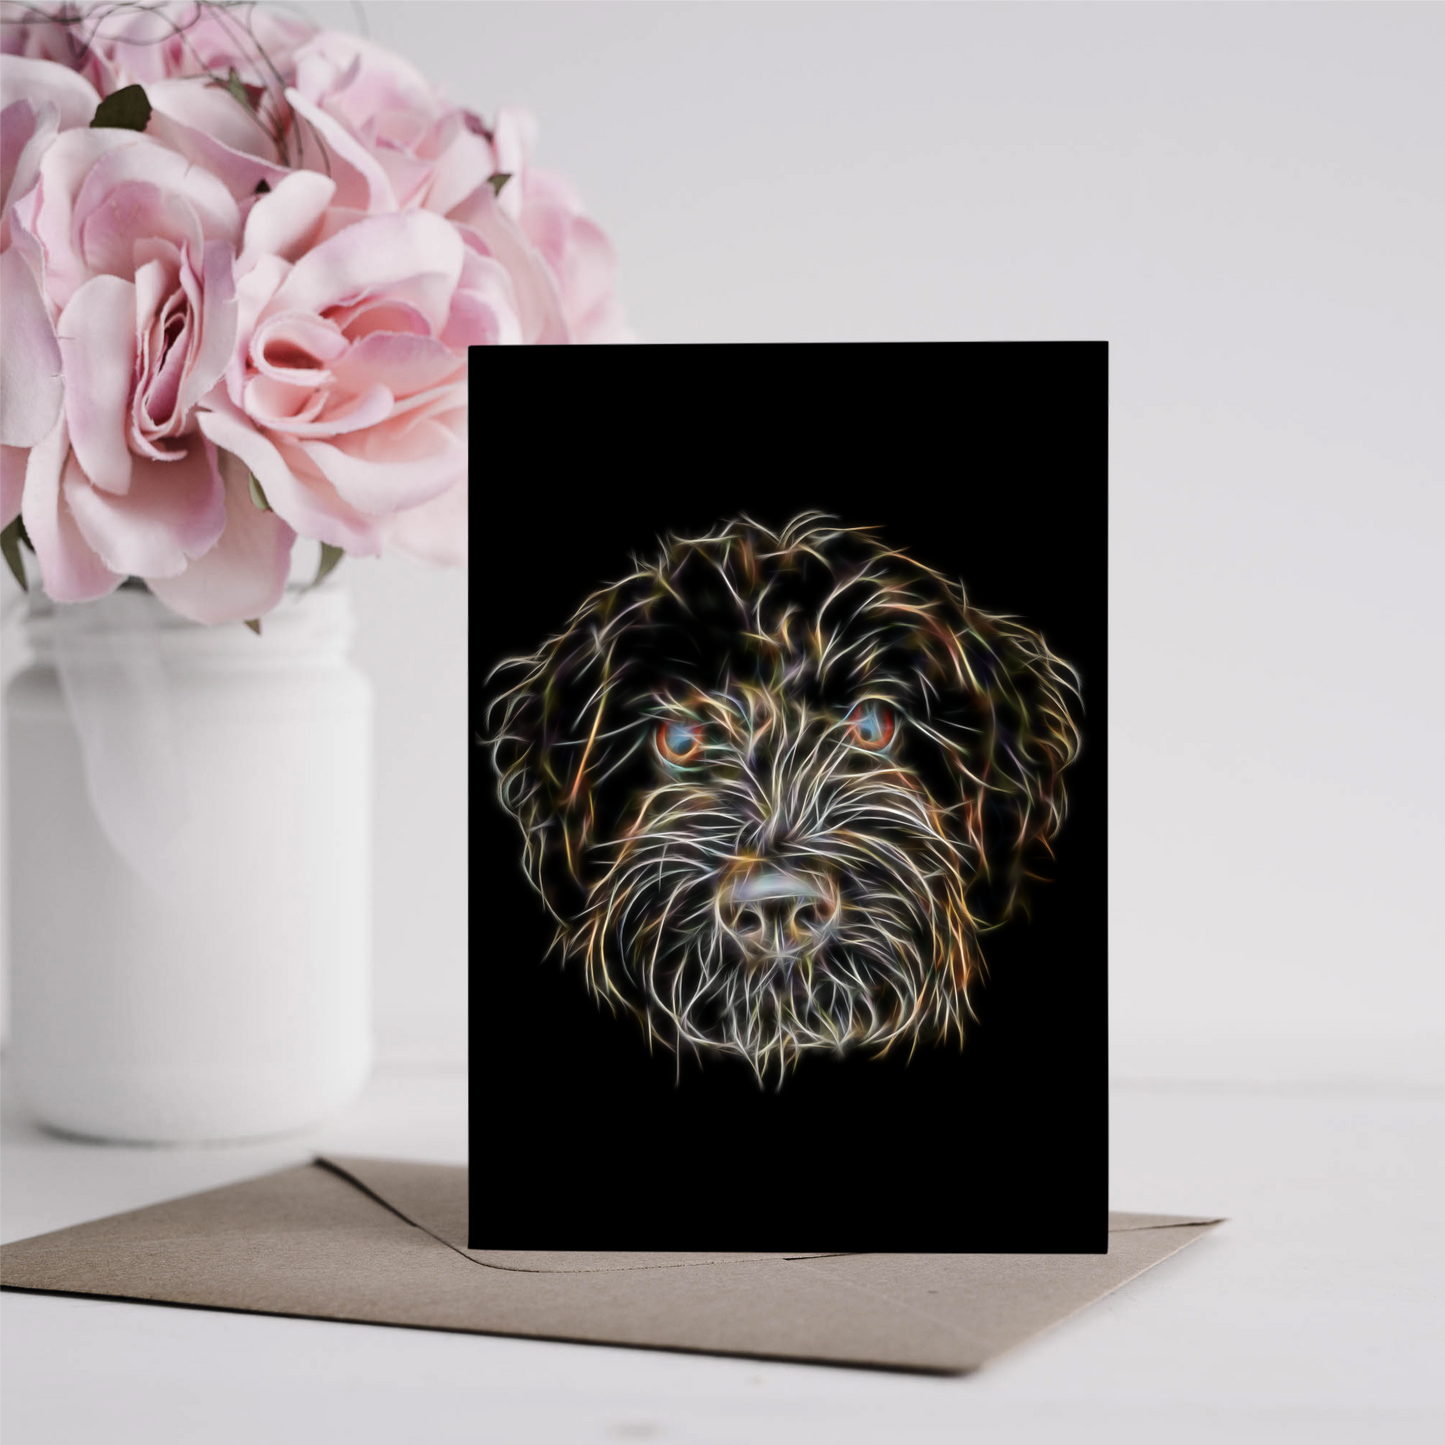 Black Labradoodle Greeting Card Blank Inside for Birthdays or any other Occasion